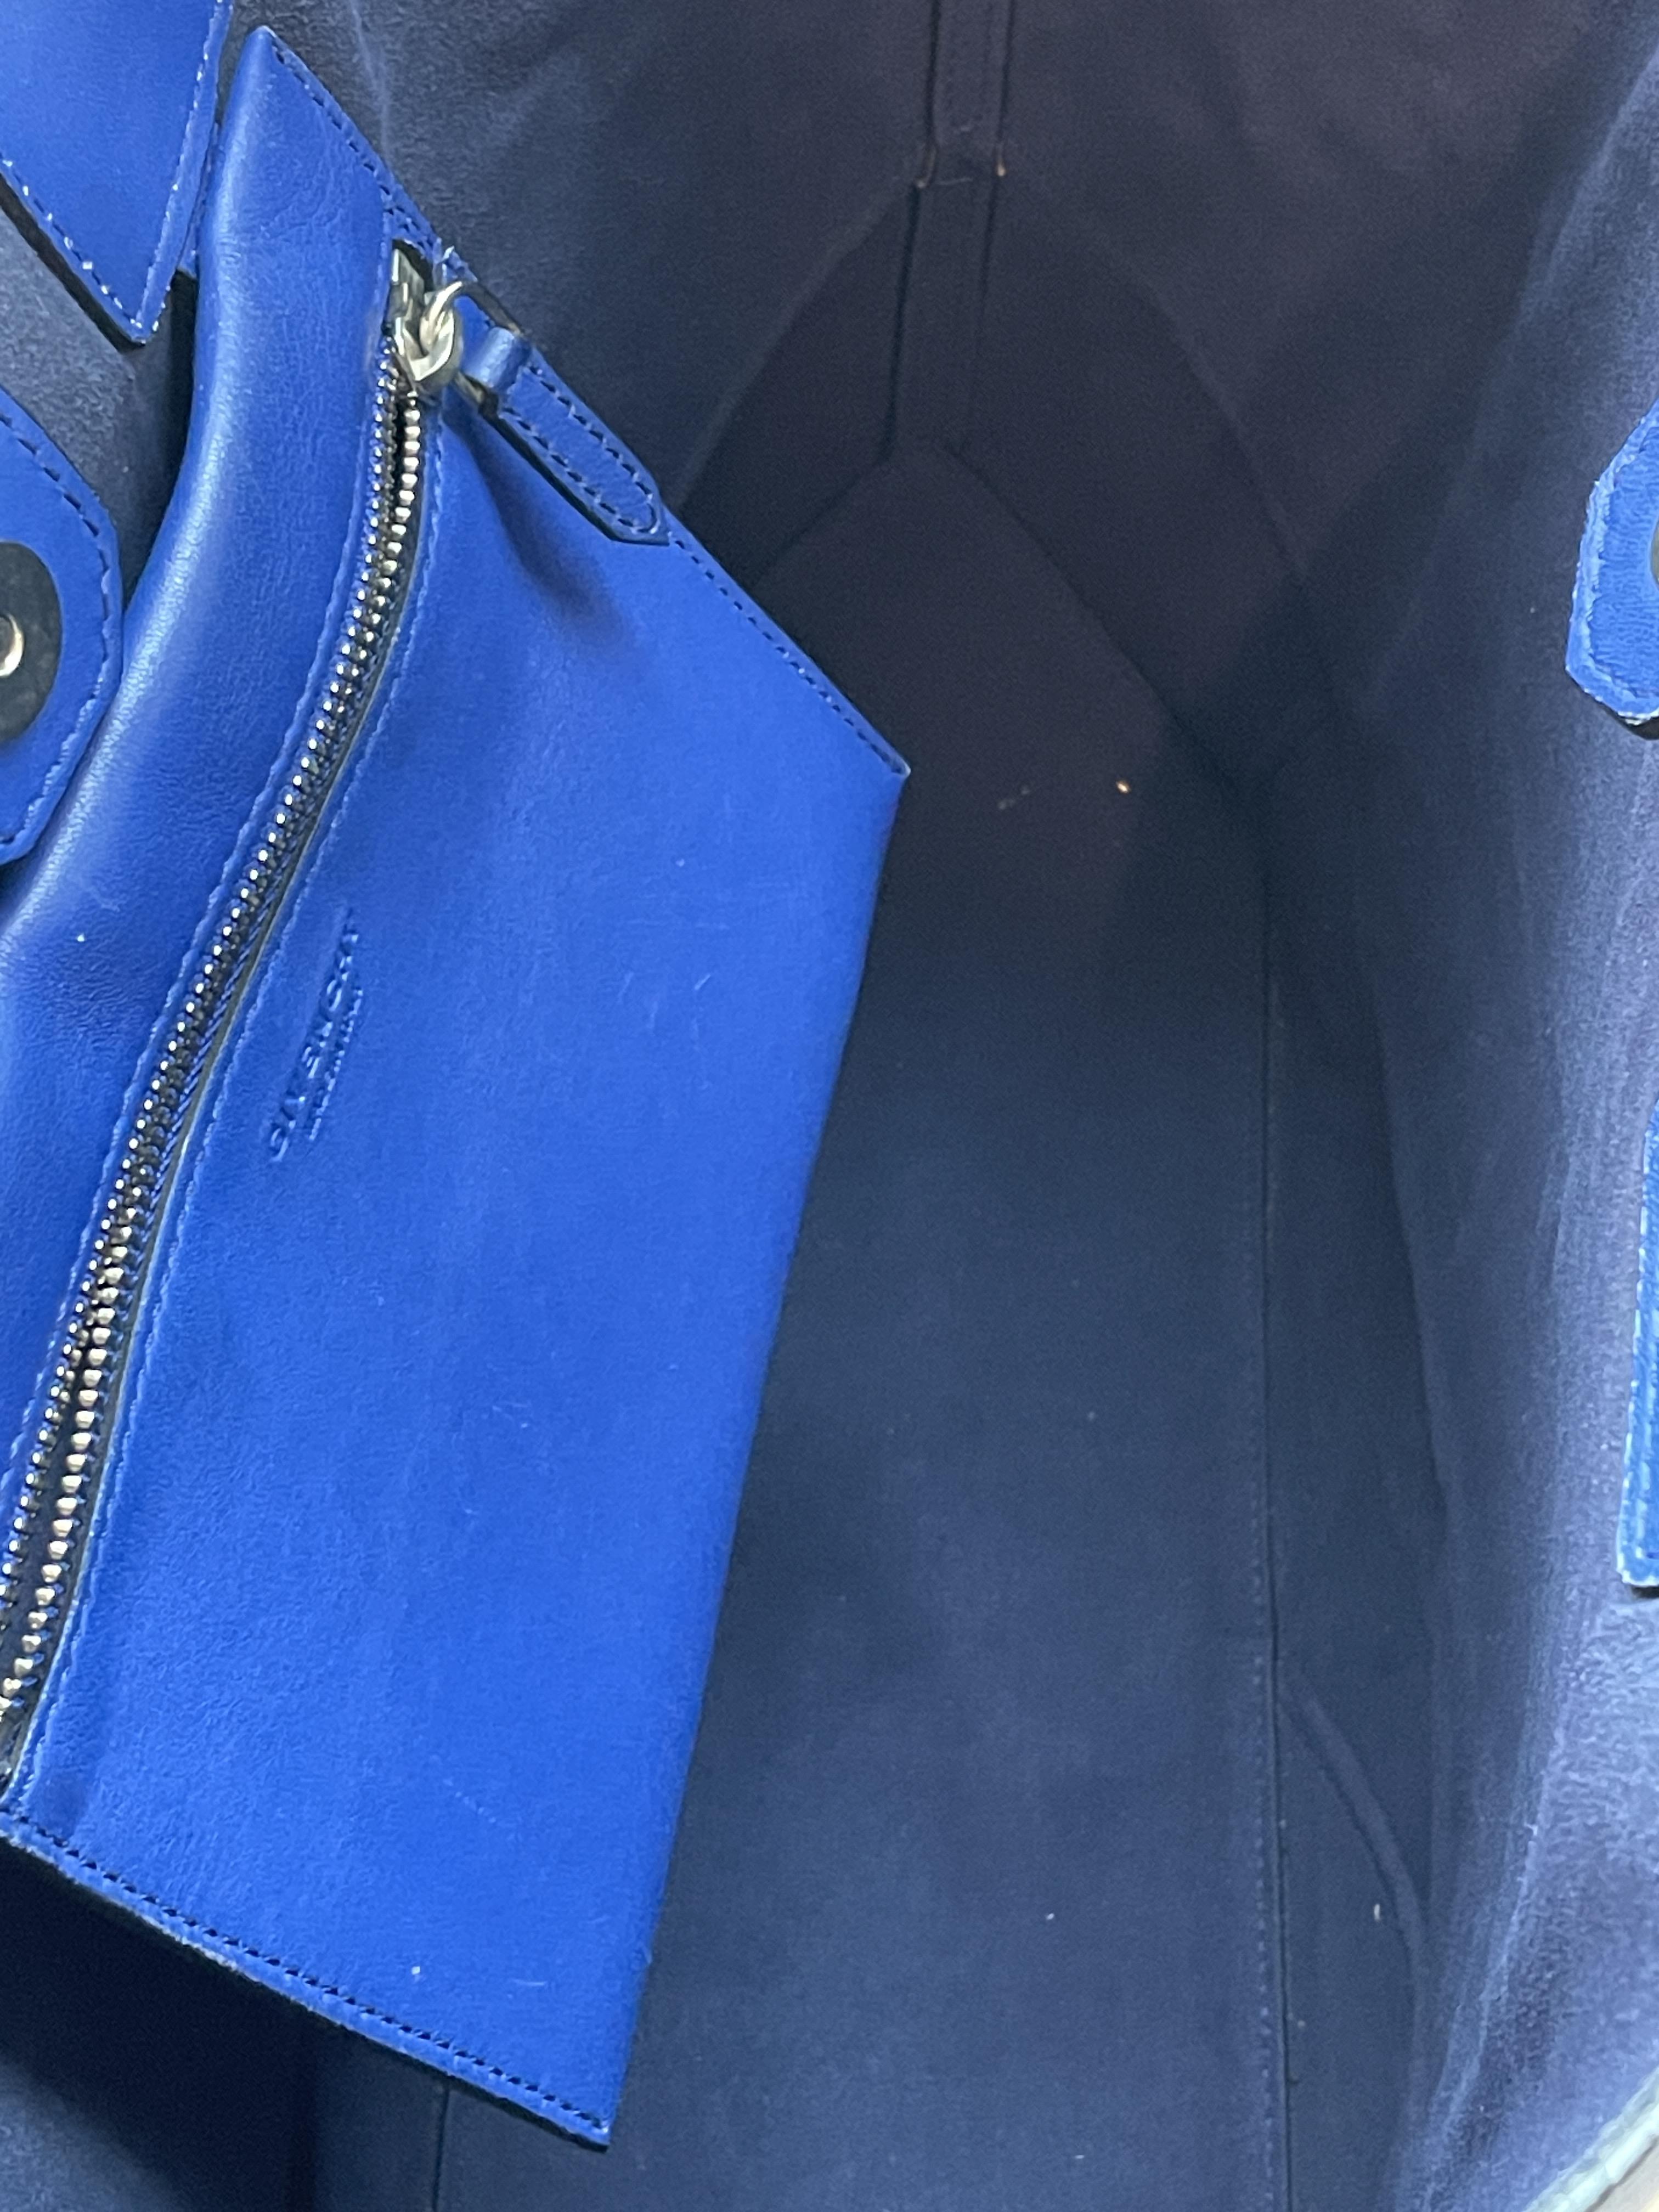 A GIVENCHY BLUE 'EASY' LEATHER TOTE BAG - Image 9 of 10